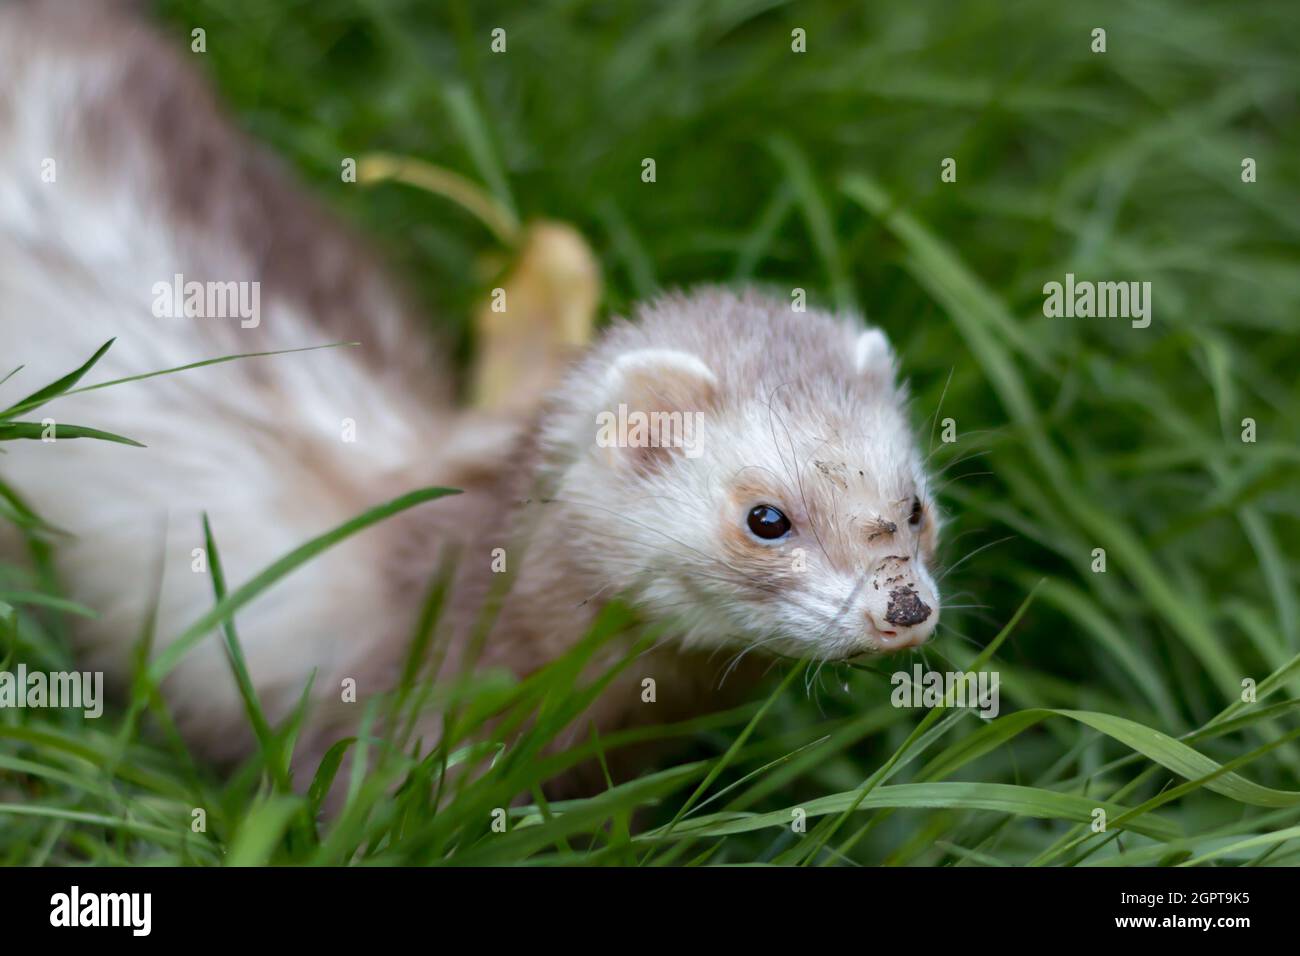 Close-up Of A Ferret In Grass Stock Photo